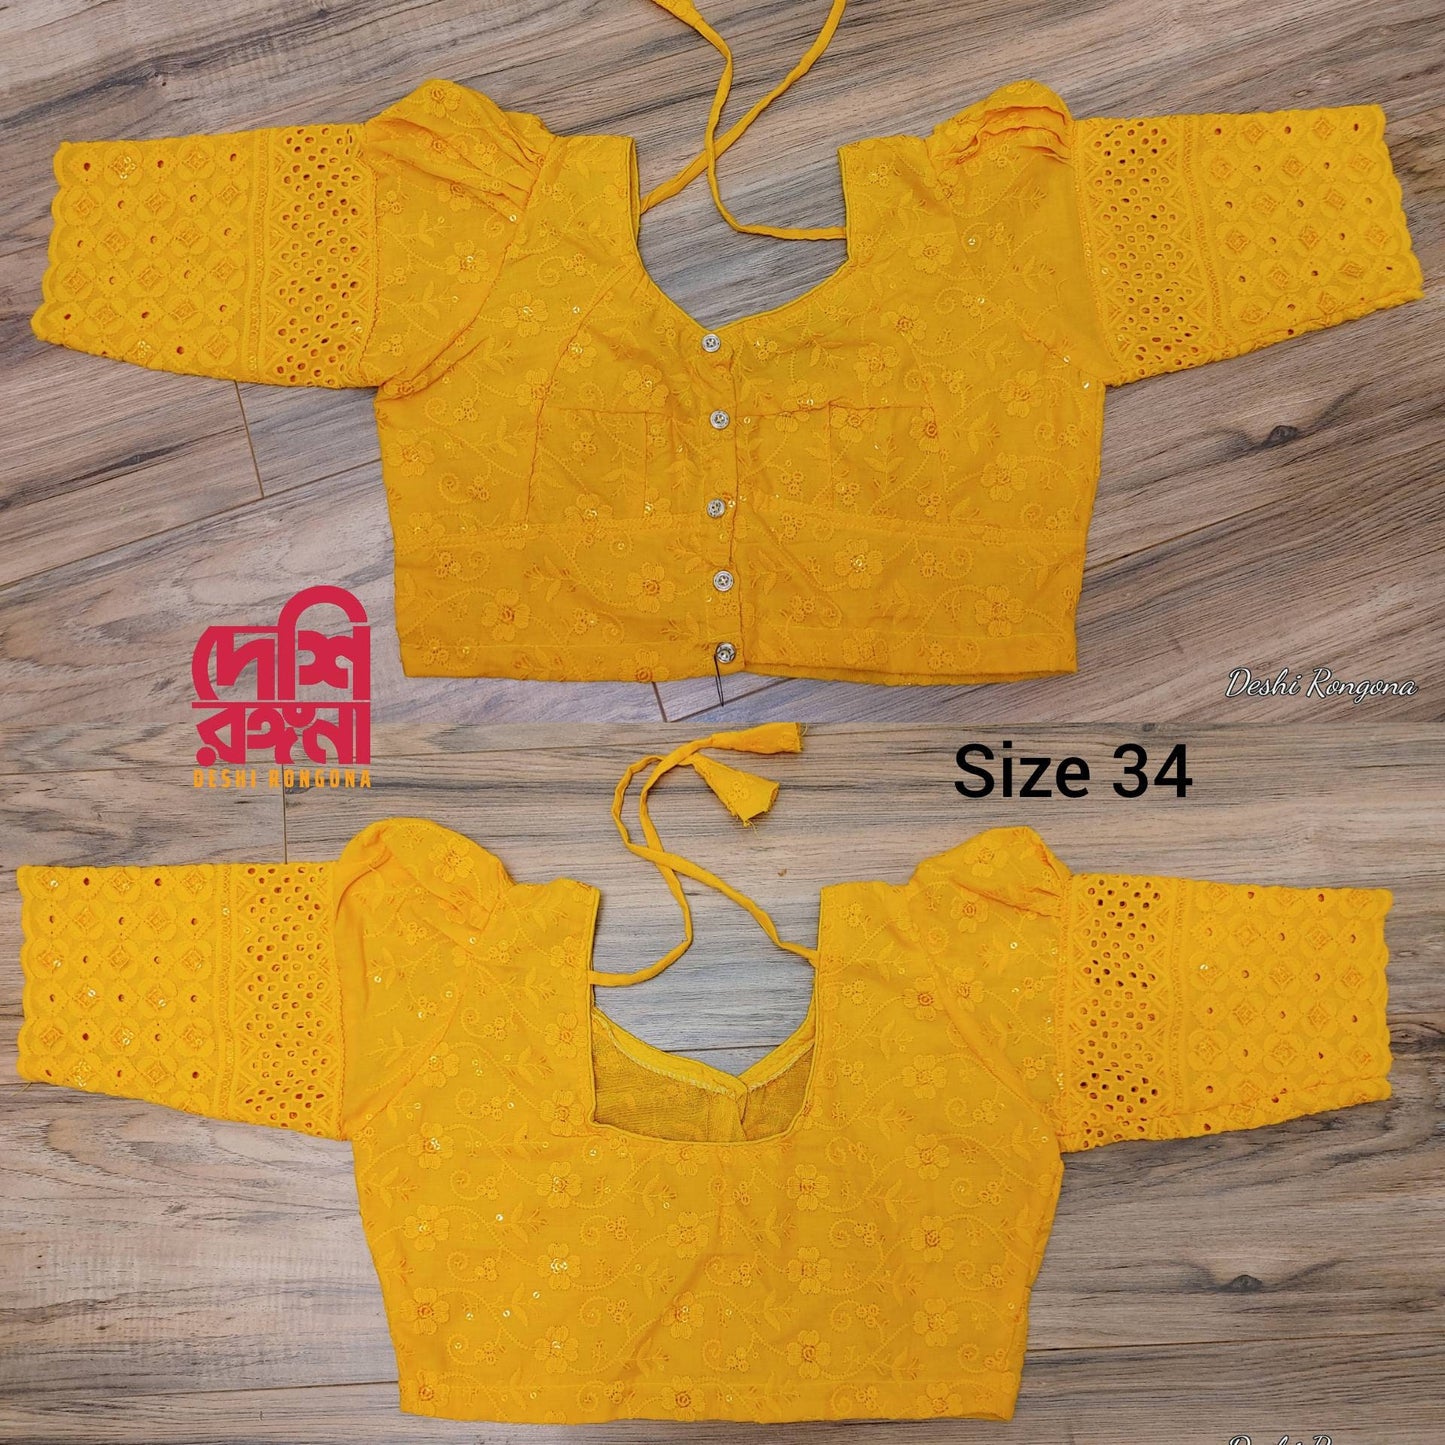 Lakhnaw Cotton Blouse, Yellow Orange Ready Designer Sequined Embroidered Blouse, Comfortable, goes with most yellow-orange sarees